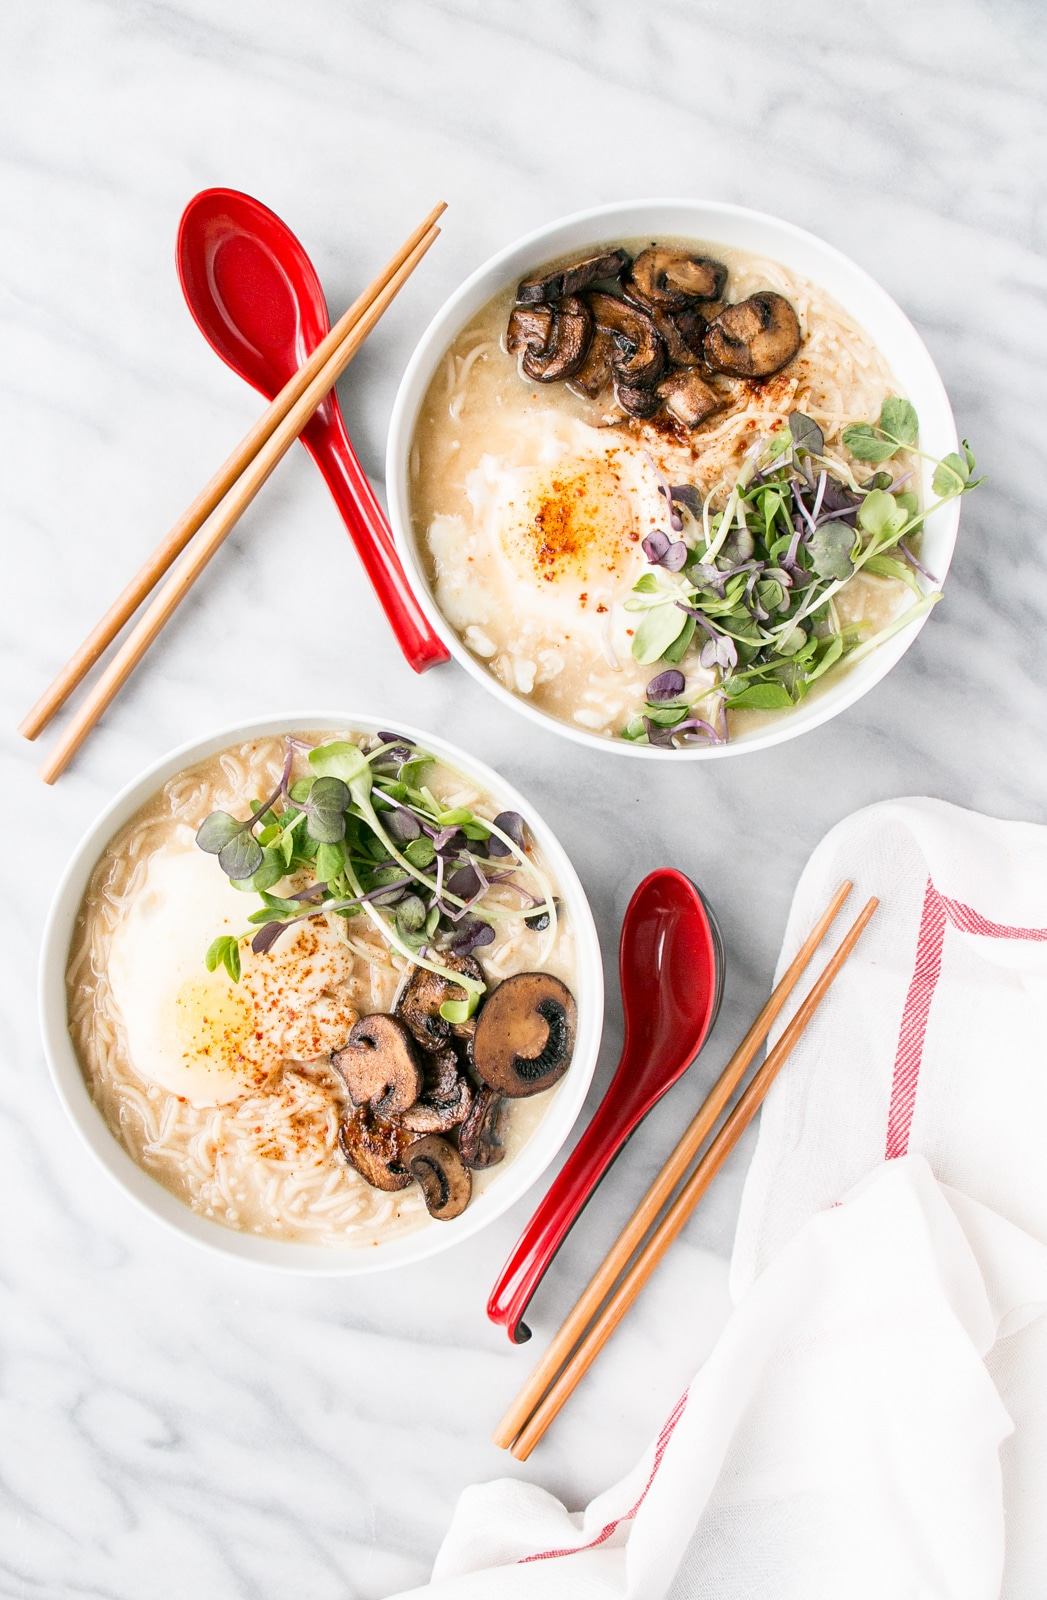 "Instant" Miso Ramen is the quick and easy answer to Meatless Mondays! Made in under 15 minutes, these flavourful noodles are topped with a poached egg and vegetables. PLUS, it's a ONE POT meal! 